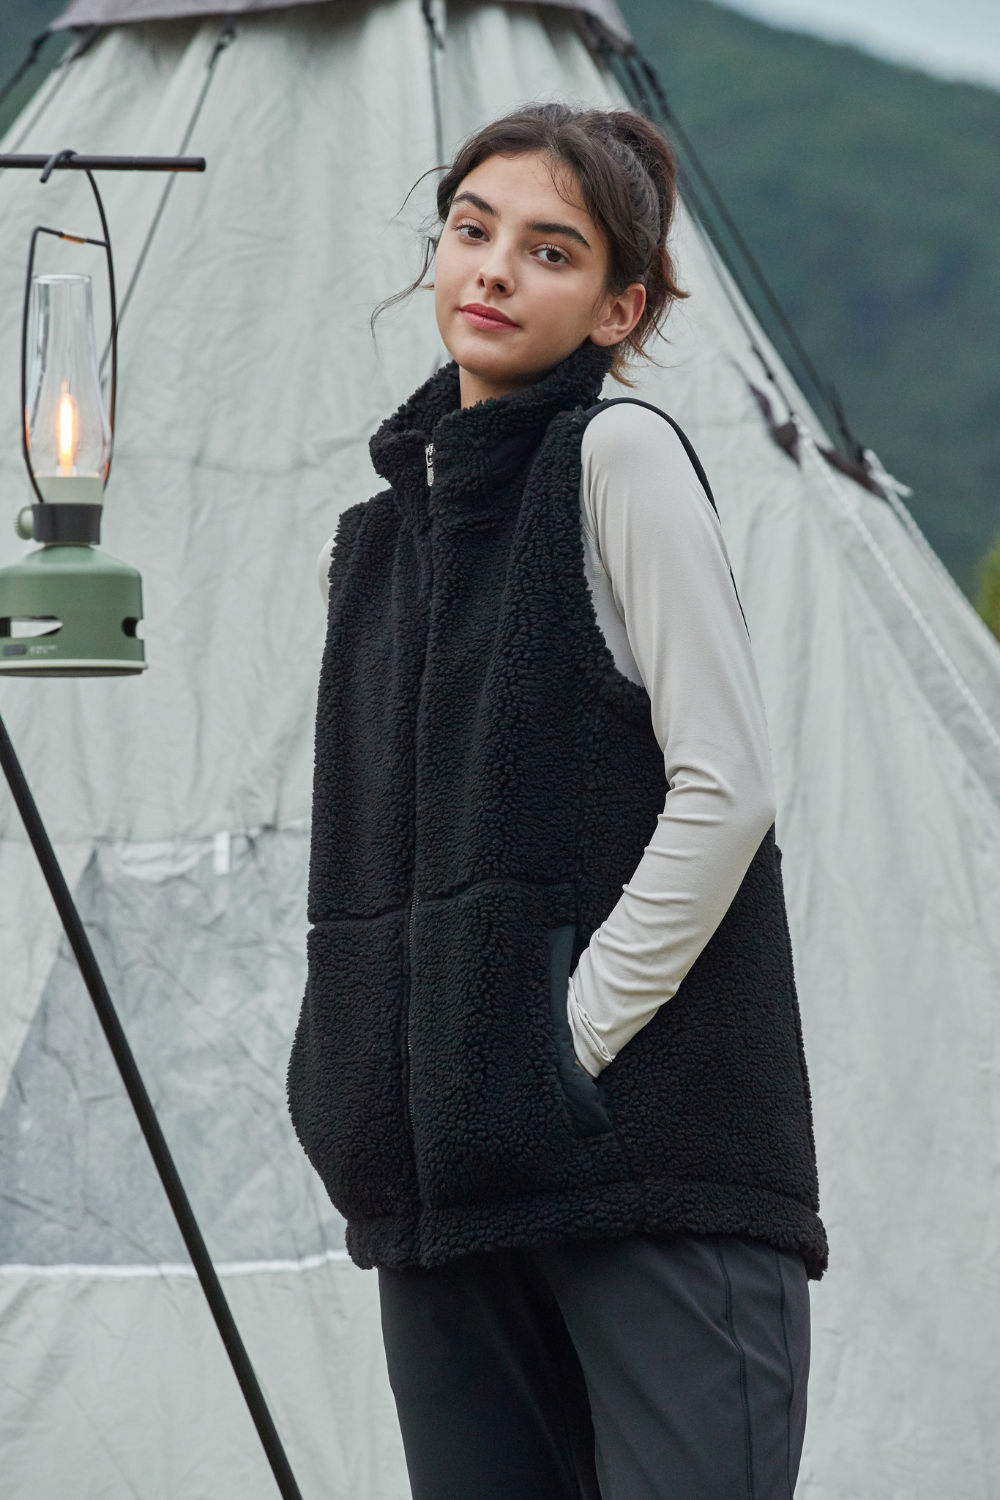 Sustainable Sherpa Vest